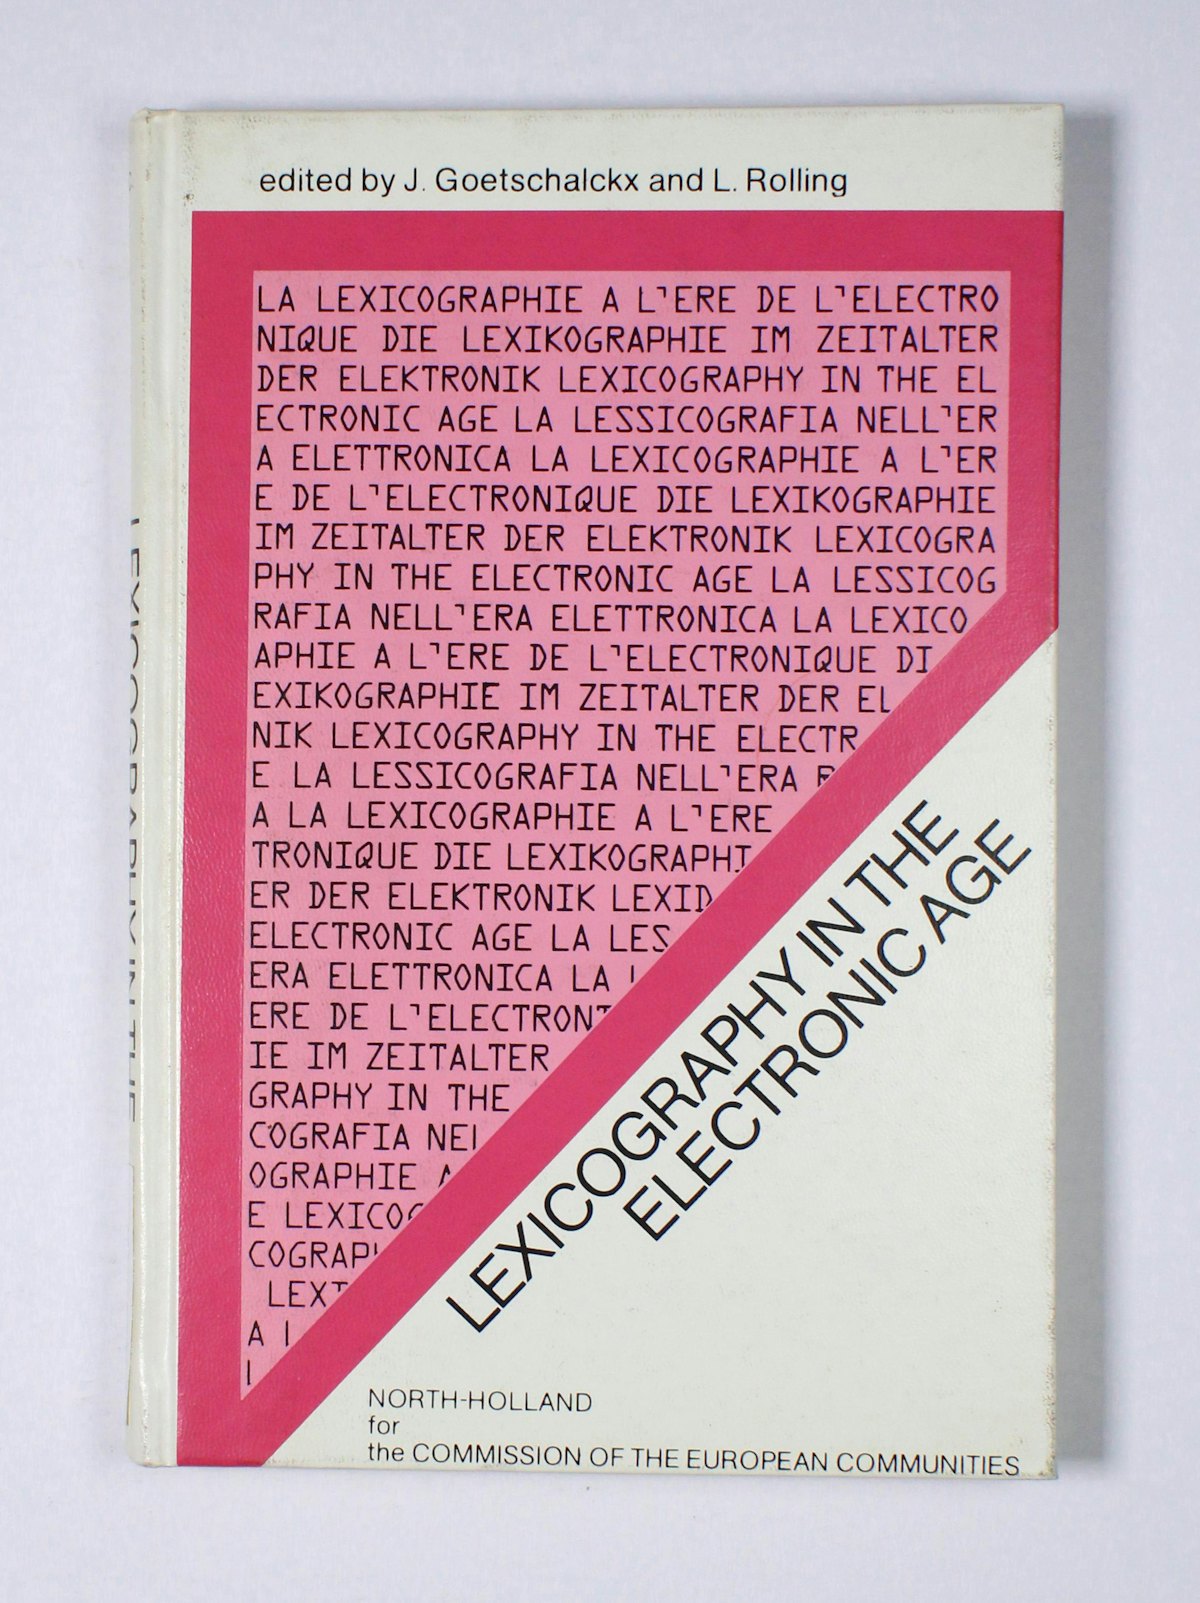 Lexicography in the Electronic Age